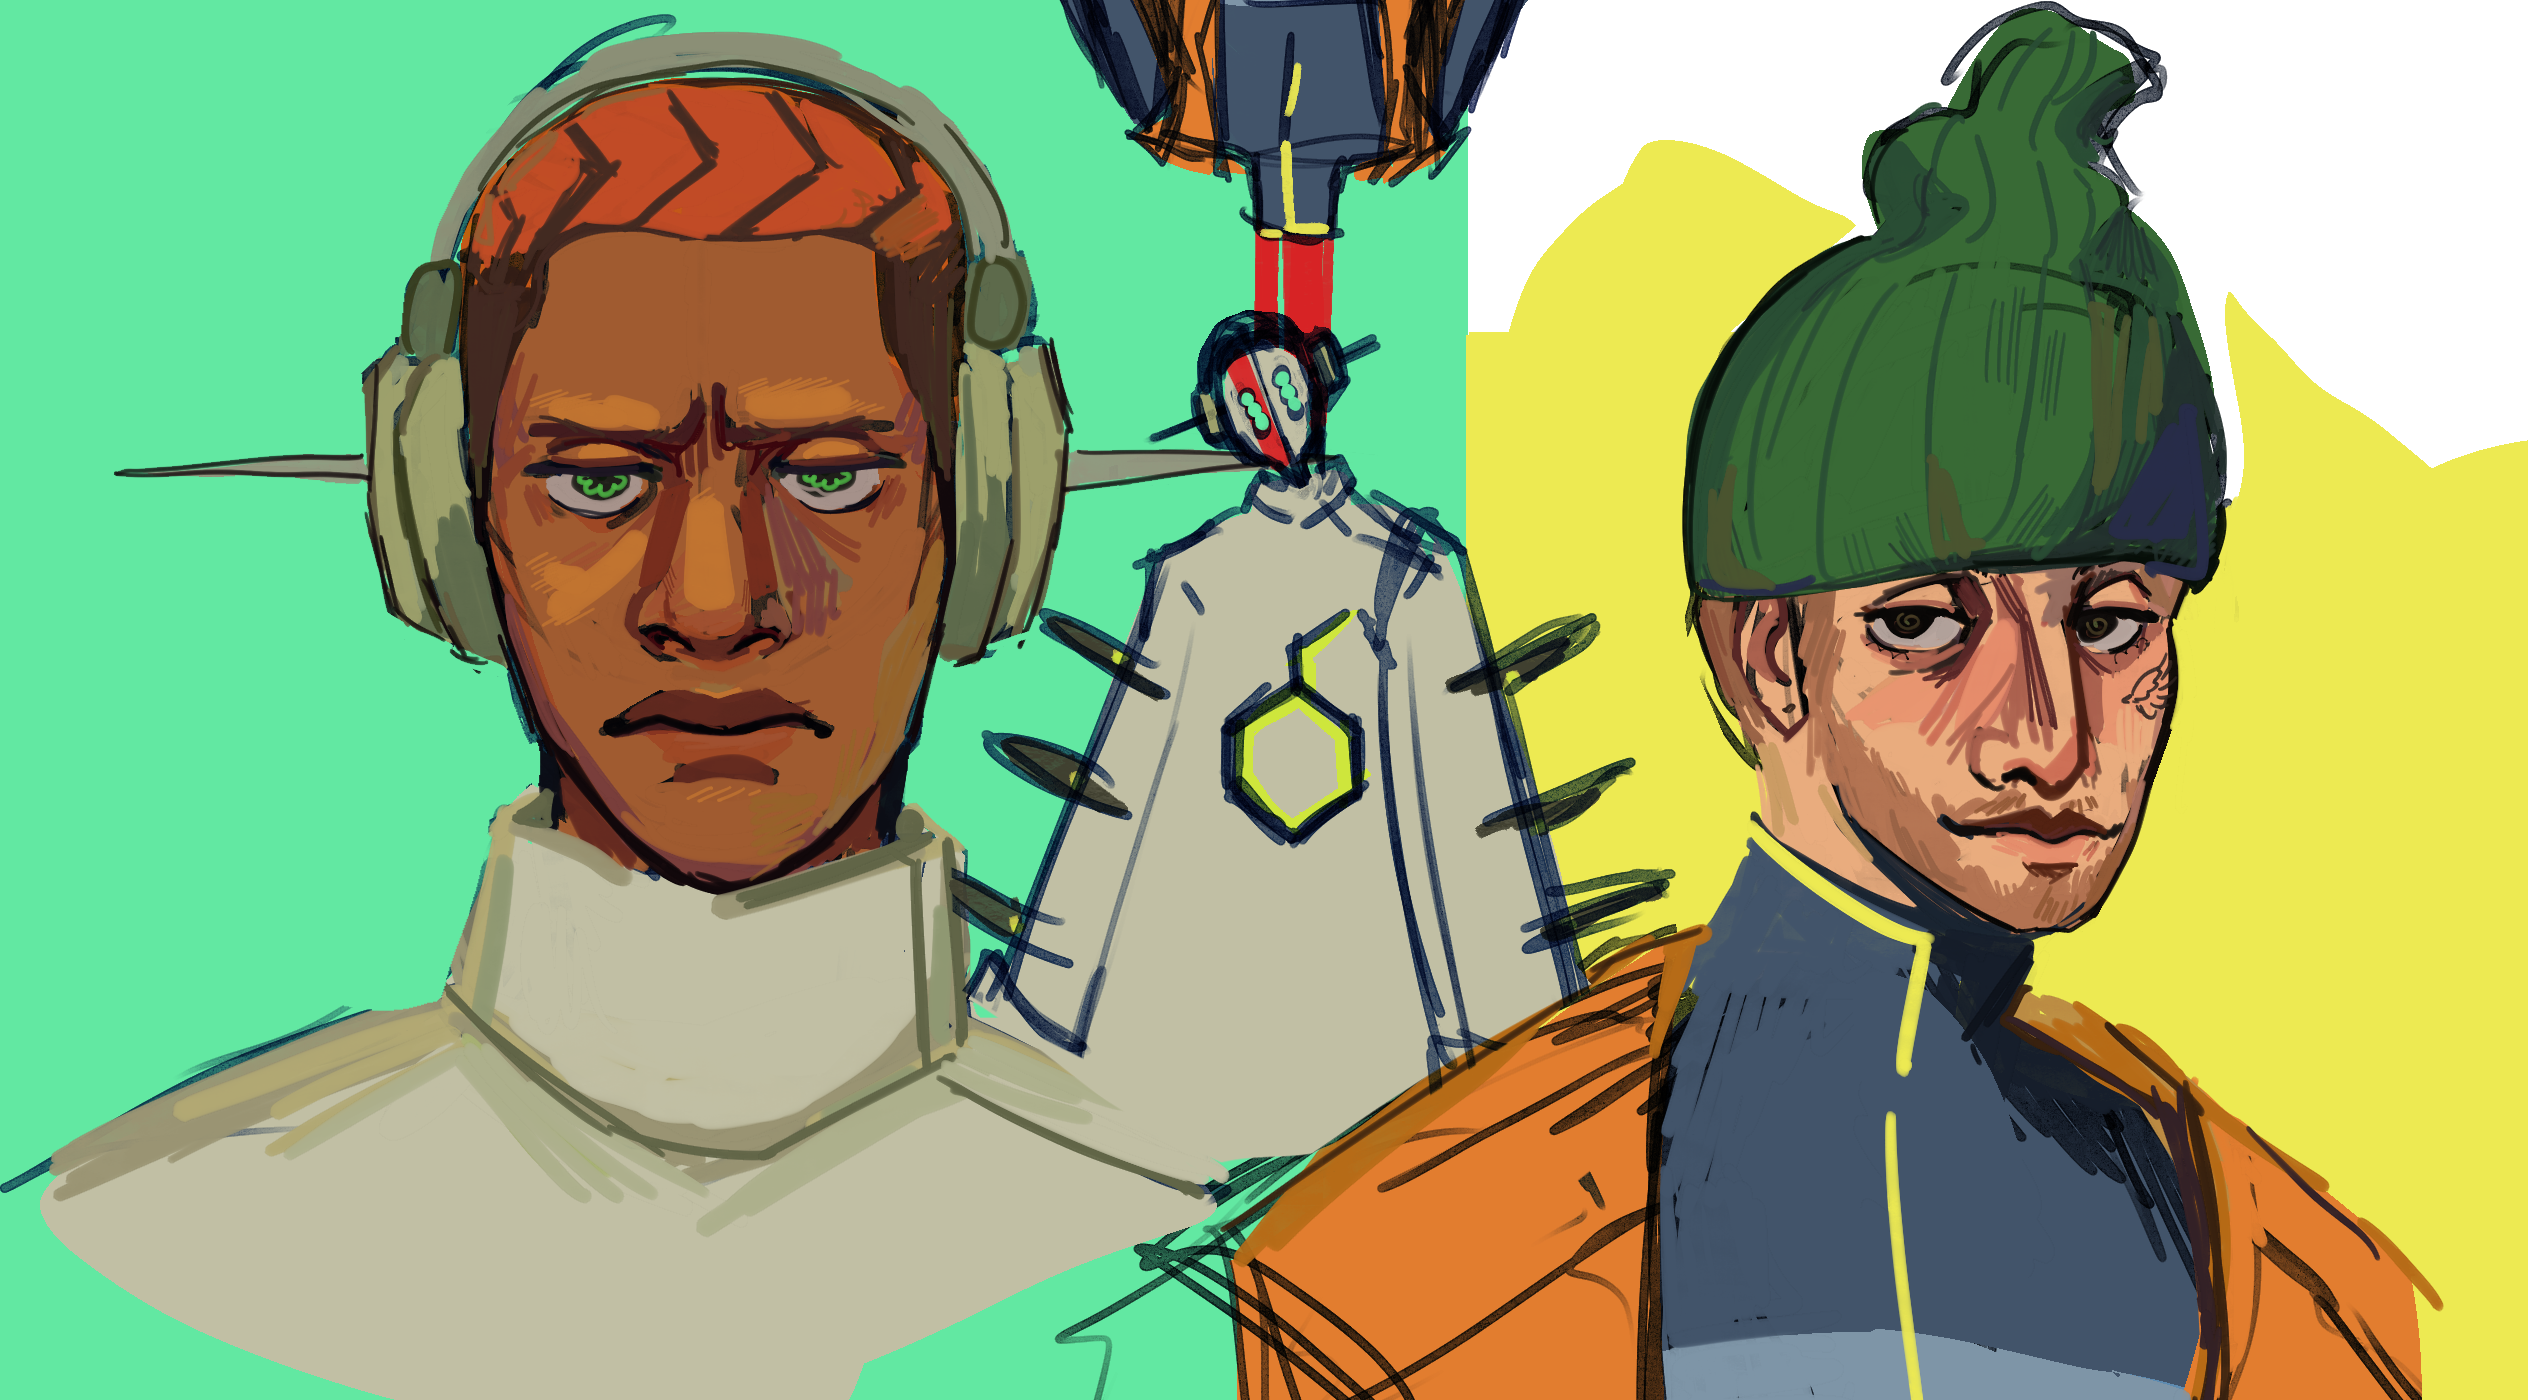 A digital piece with a few subjects, like a simple collage. On the left is a portrait of DJ Cyber frowning at the viewer, brows furrowed.
                    In the center is a rough sketch of DJ Cyber with the mask on and an upside-down decapitated Felix above him, with stylized blood flowing from his neck to Cyber.
                    On the right is a portrait of Felix, calmly looking at the viewer from the side. The portraits are minimally but colorfully rendered, while the center sketch just has local colors.